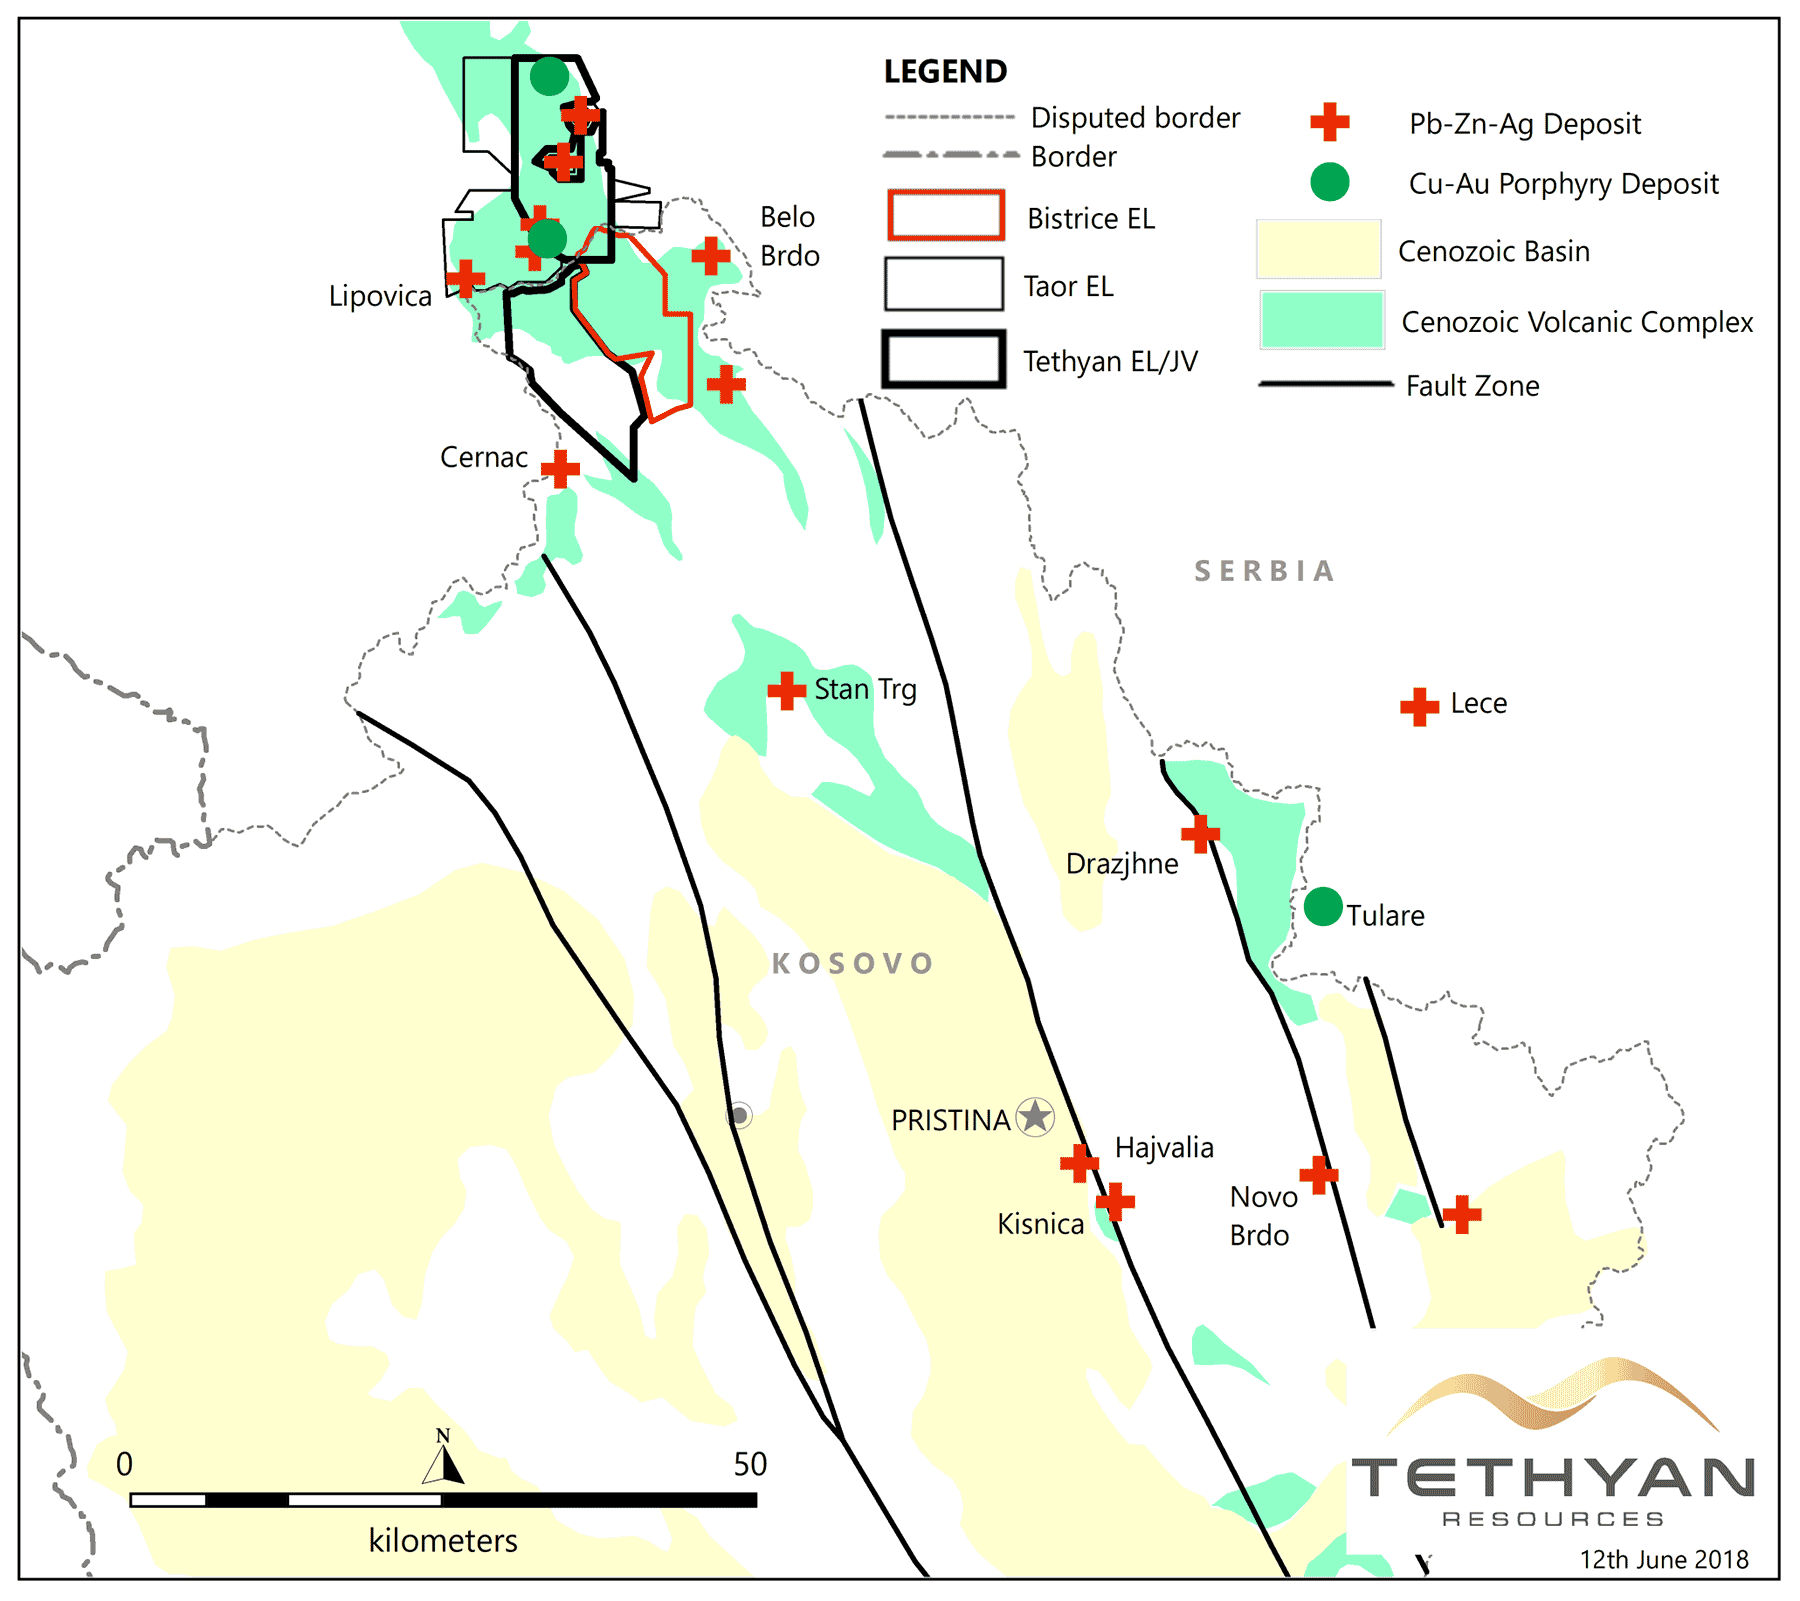 The Bistrice exploration license shown with simplified geology of Kosovo and the mineral deposits of the ‘Trepca’ mining district. Sources: www.kosovo-mining.org and internal company data.